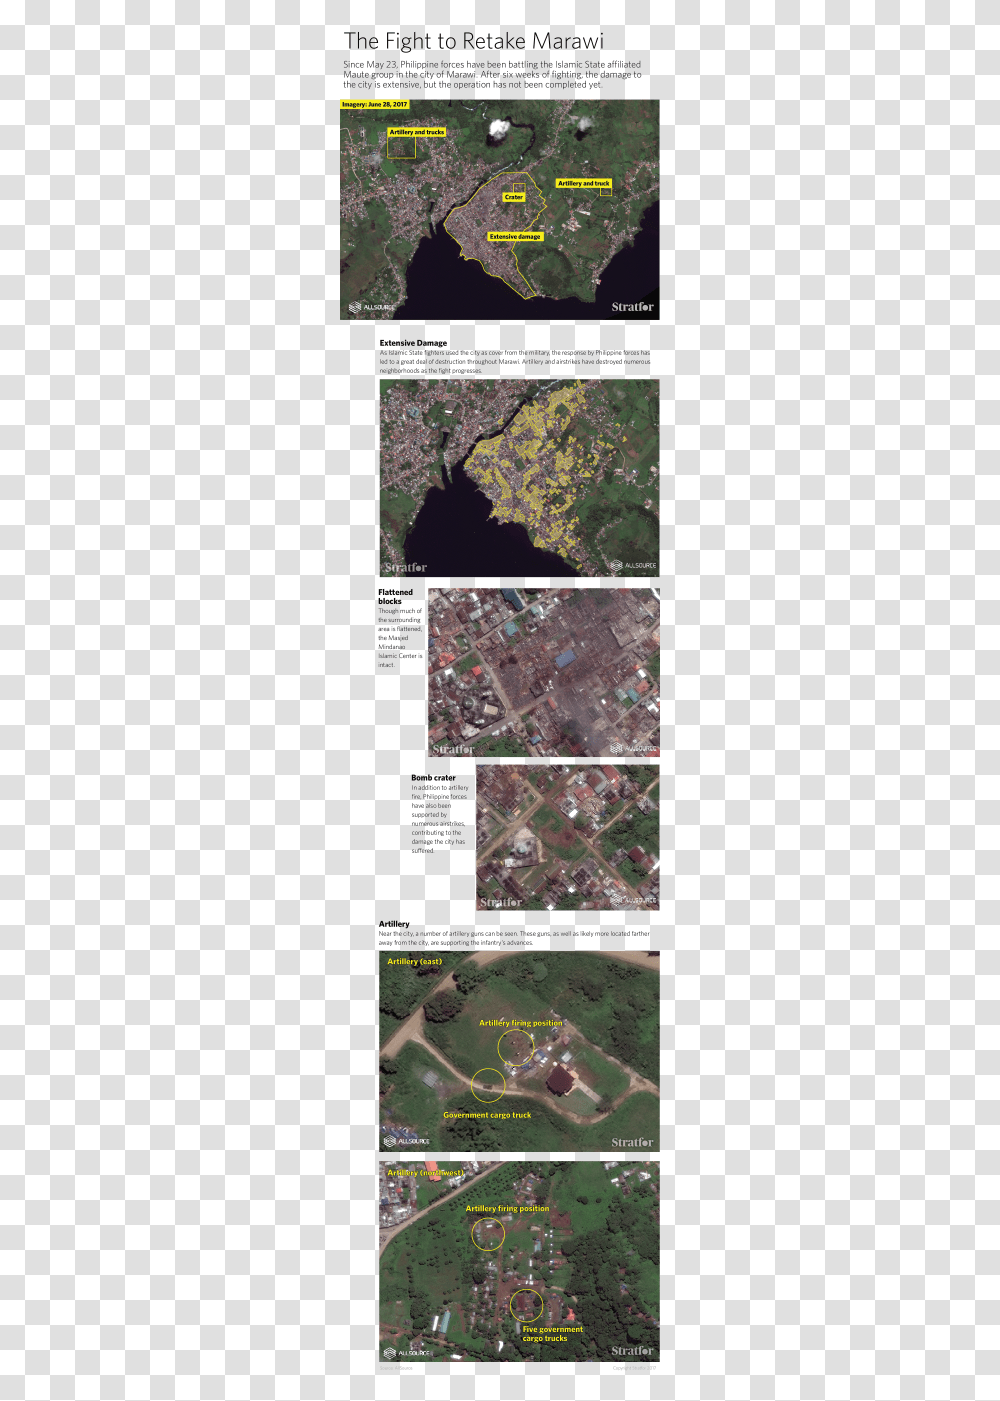 Land Use Of Marawi City, Landscape, Outdoors, Nature, Scenery Transparent Png